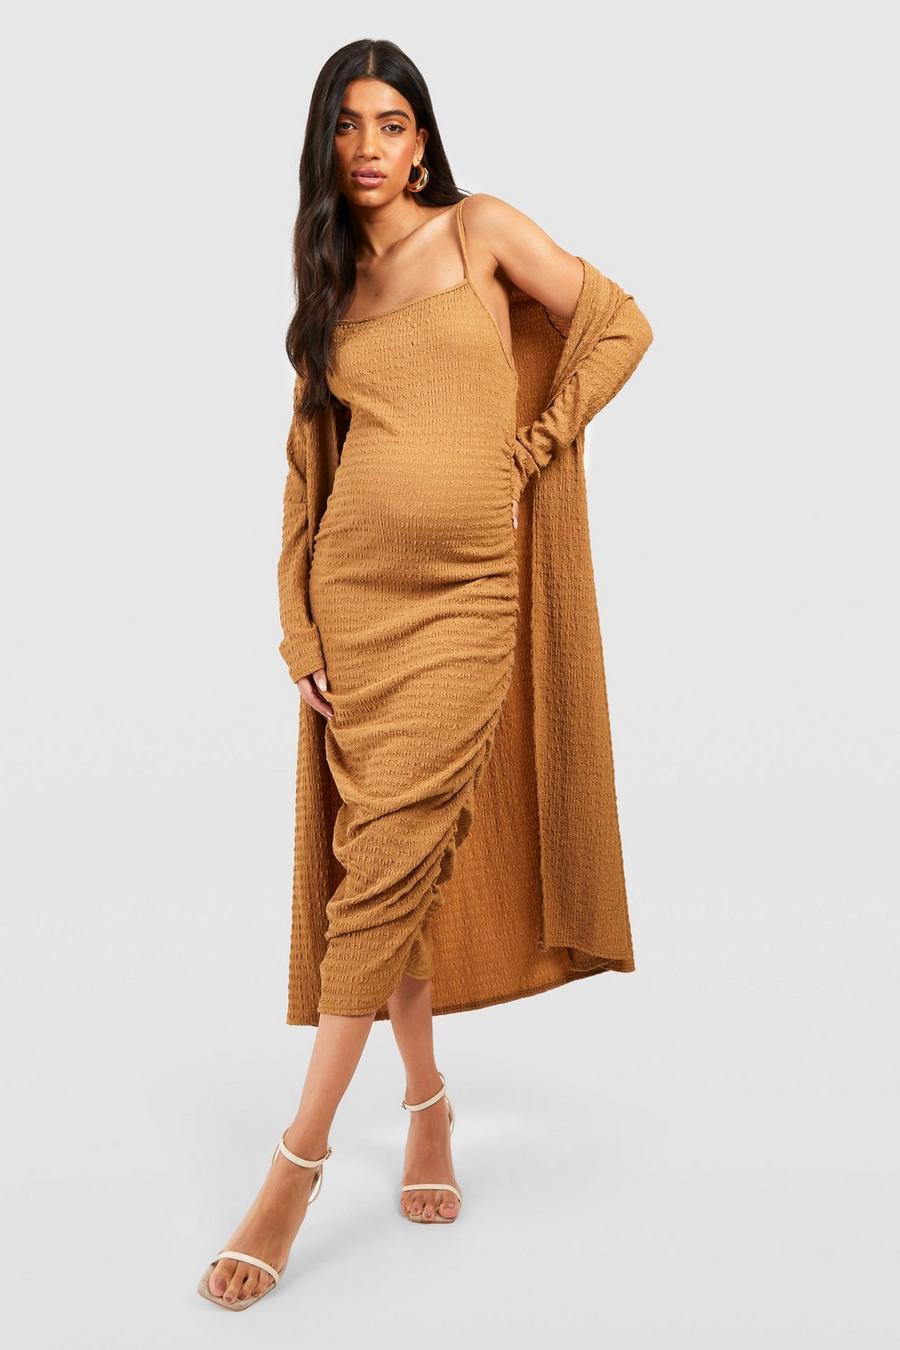 Mocha Maternity Textured Strappy Dress And Duster Coat